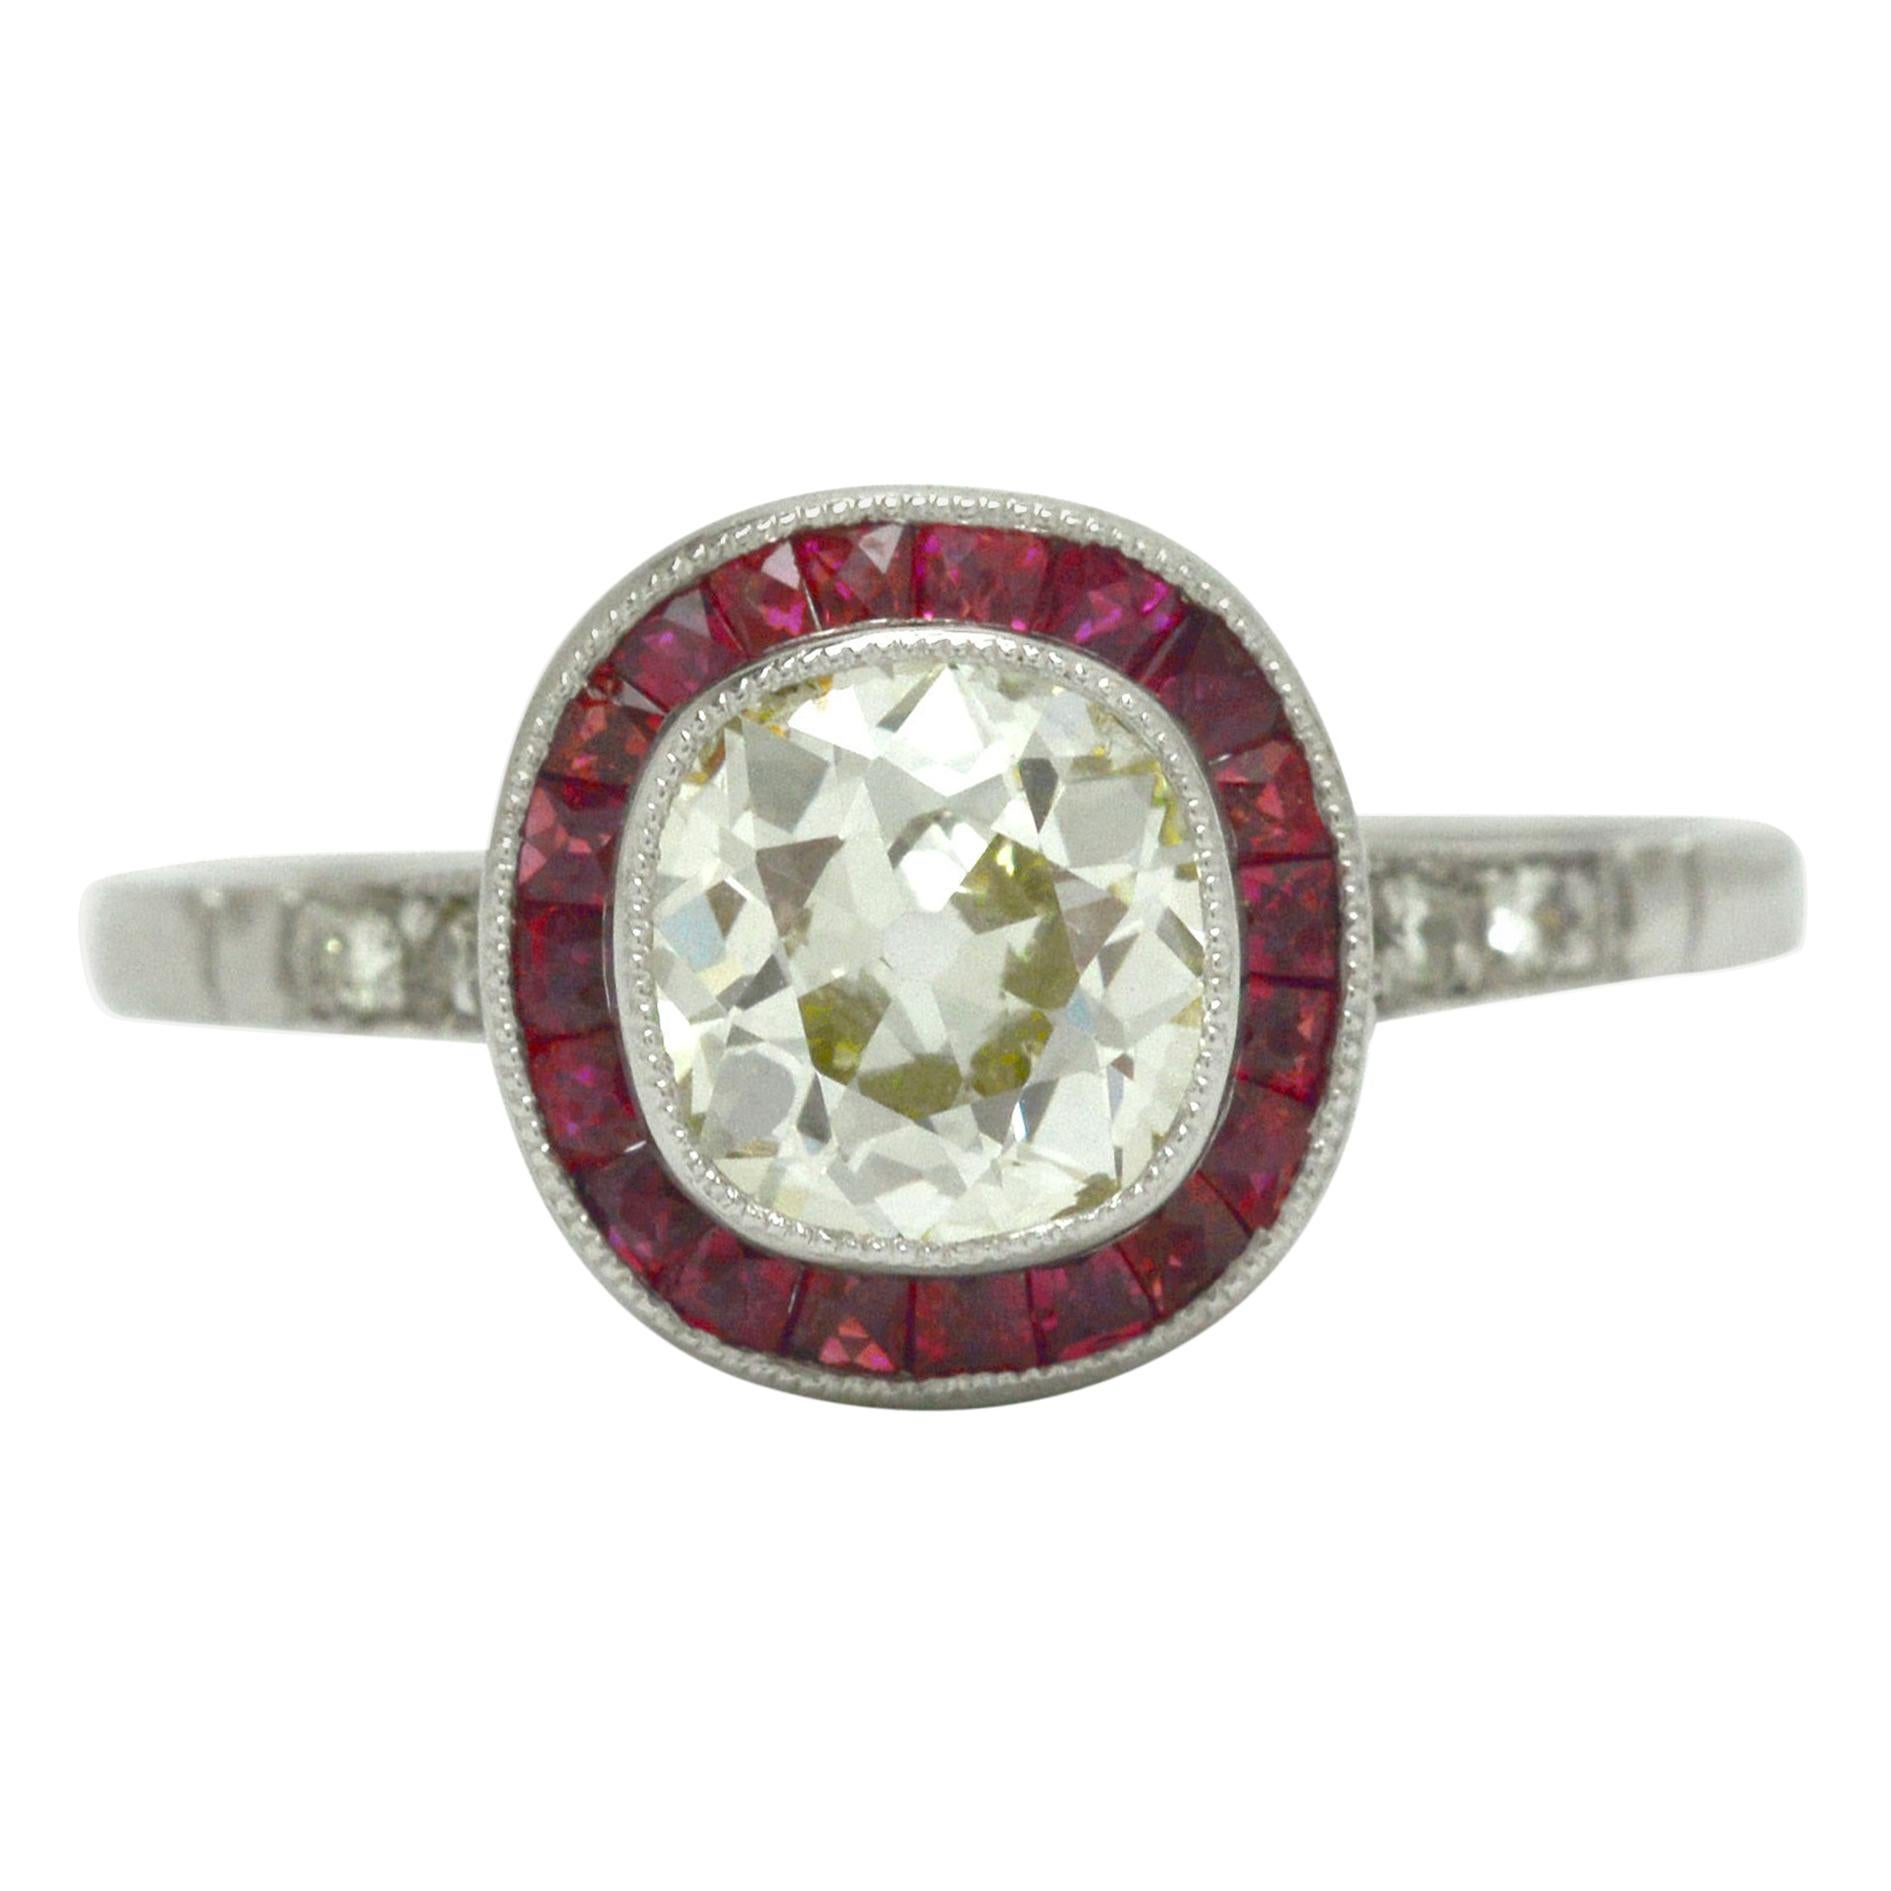 Antique Cushion Cut Diamond Engagement Ring 1.08 Ct Old Mine Ruby Art Deco Style